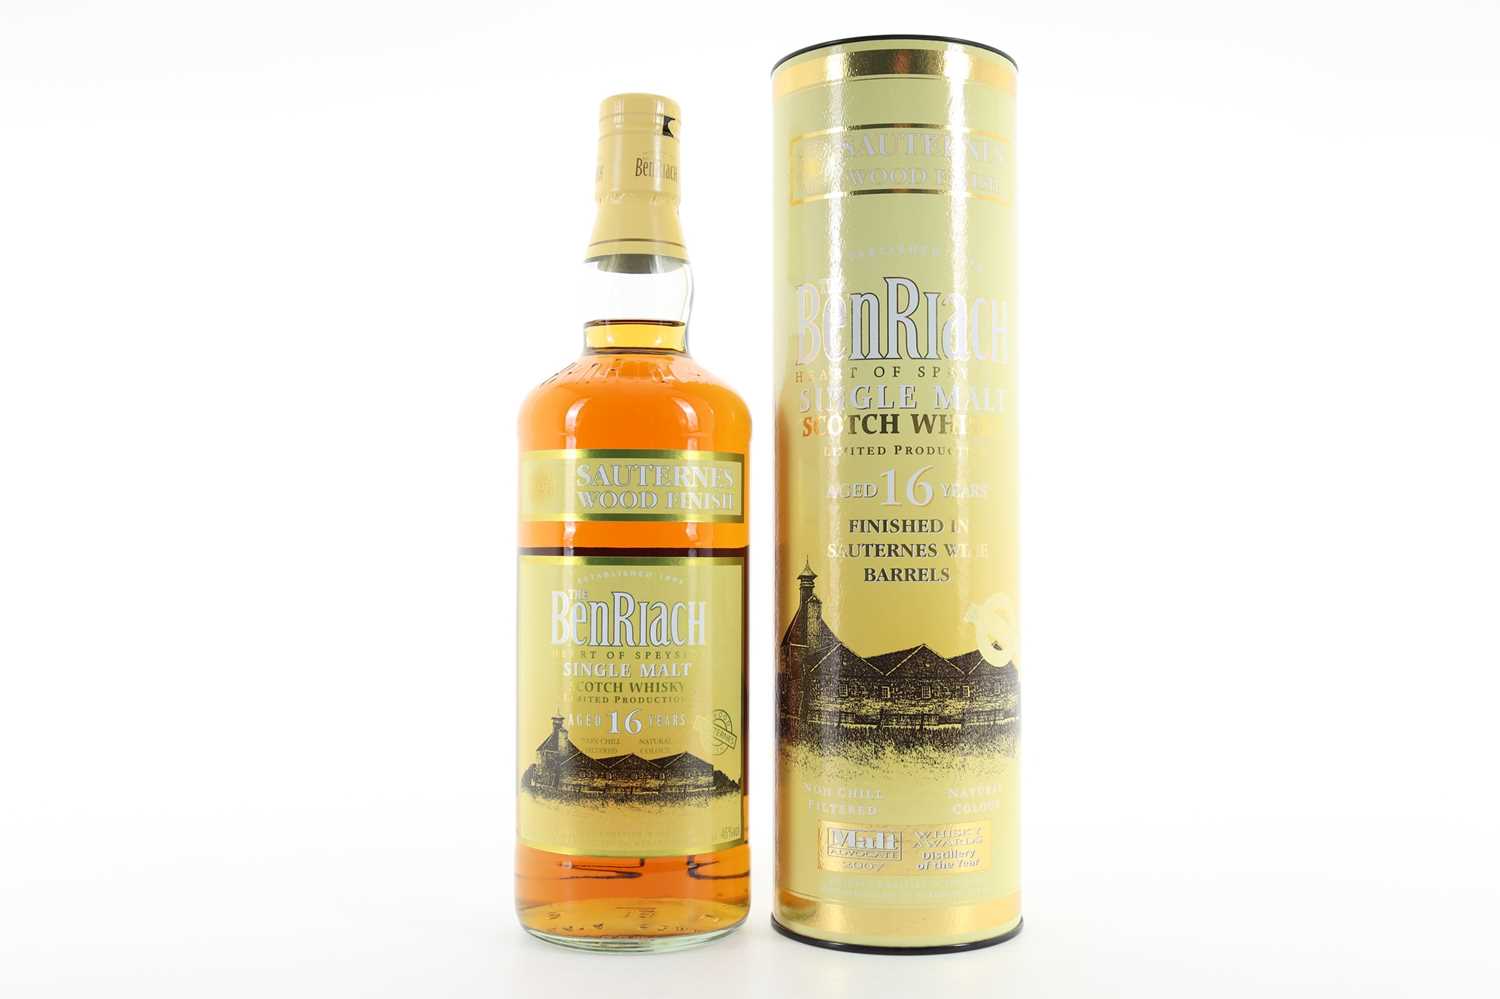 Lot 31 - BENRIACH 16 YEAR OLD SAUTERNES WOOD FINISH